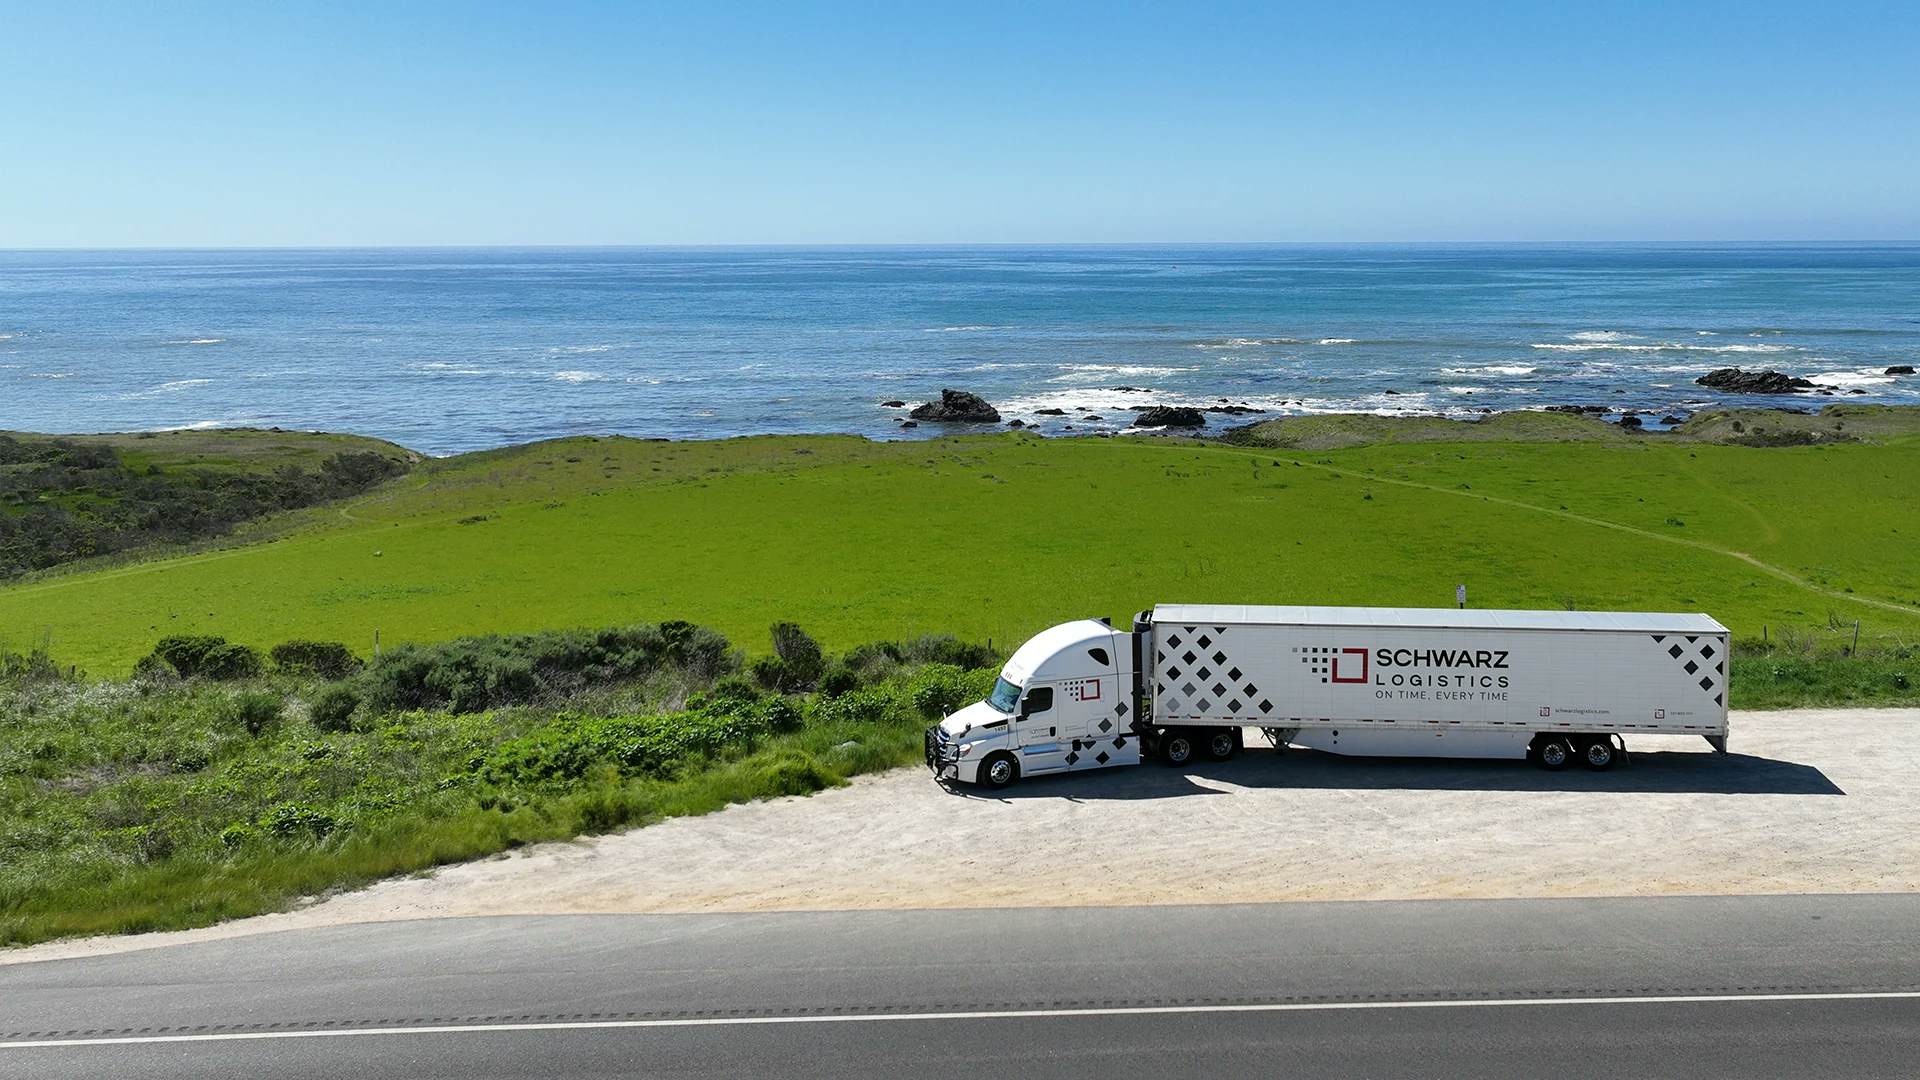 A semi-truck with a white tractor and a long trailer emblazoned with "SCHWARZ LOGISTICS" on the side, suggesting it is part of a logistics and transport company. The truck is parked on a roadside area with a lush green landscape and a scenic view of the sea.